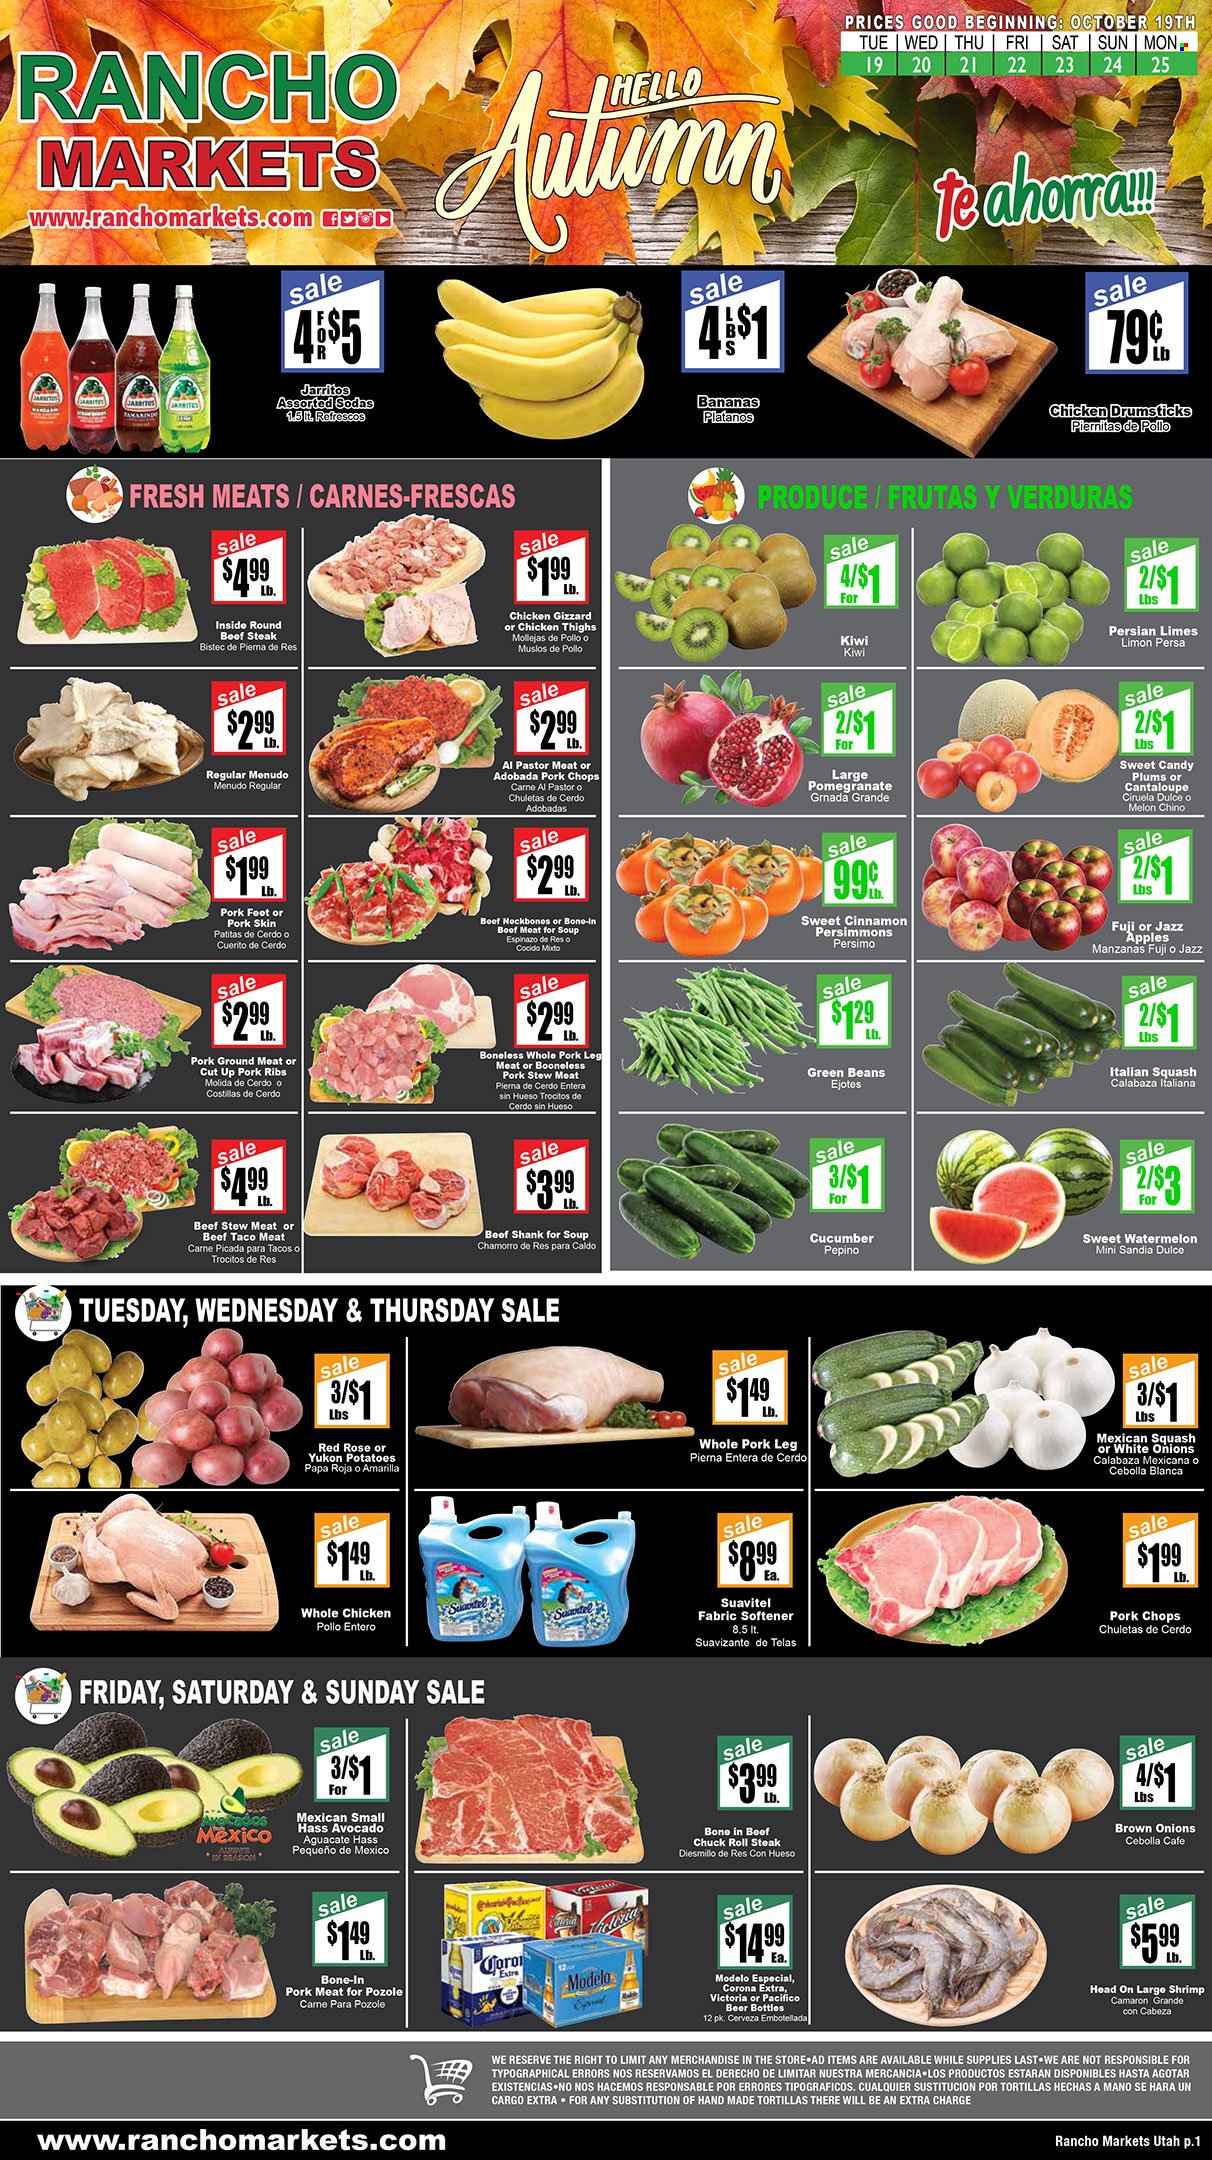 thumbnail - Rancho Markets Flyer - 10/19/2021 - 10/25/2021 - Sales products - stew meat, tortillas, beans, cucumber, green beans, potatoes, mexican squash, avocado, bananas, kiwi, limes, watermelon, plums, persimmons, melons, pomegranate, shrimps, soup, ready meal, Candy, cinnamon, soda, alcohol, beer, Corona Extra, Modelo, whole chicken, chicken thighs, chicken drumsticks, chicken, beef meat, beef shank, beef steak, steak, chuck steak, ribs, pork chops, pork meat, pork ribs, pork leg, fabric softener, Suavitel. Page 1.